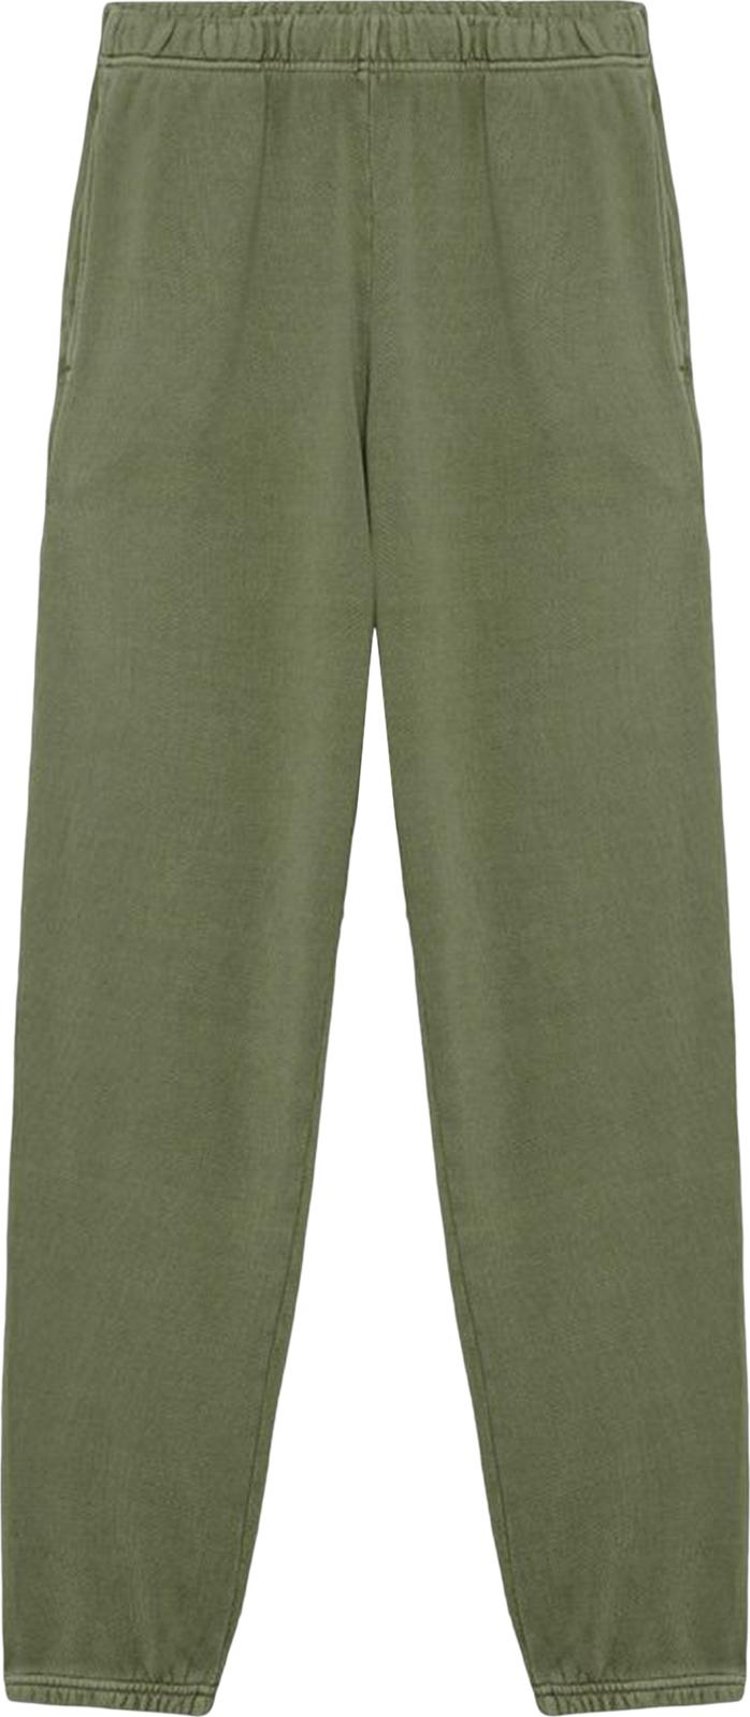 Les Tien Classic Sweatpant 'Washed Spruce'